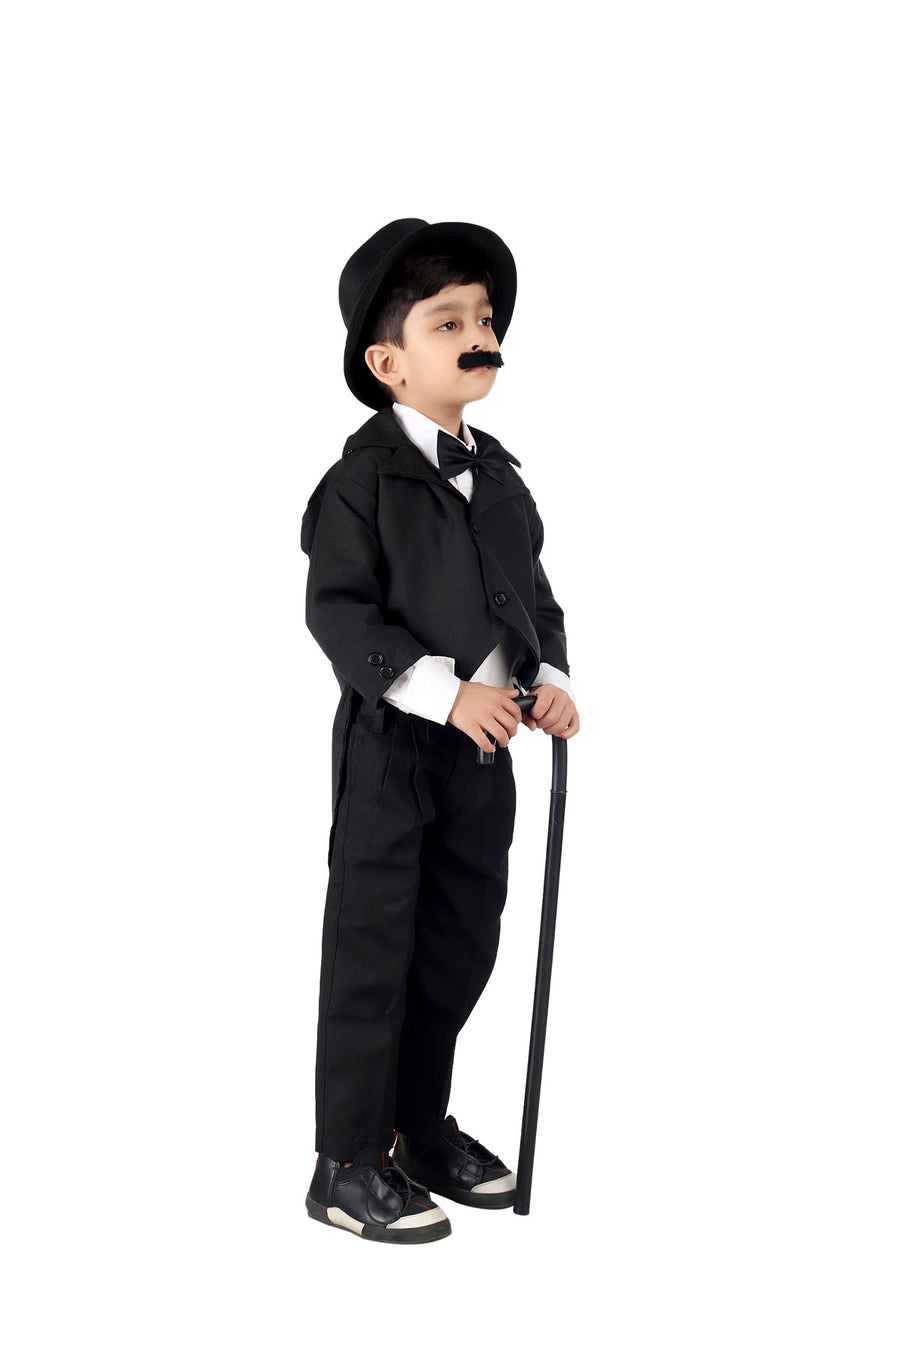 Charlie Chaplin Famous Comic Character Kids Fancy Dress Costume | With Stick